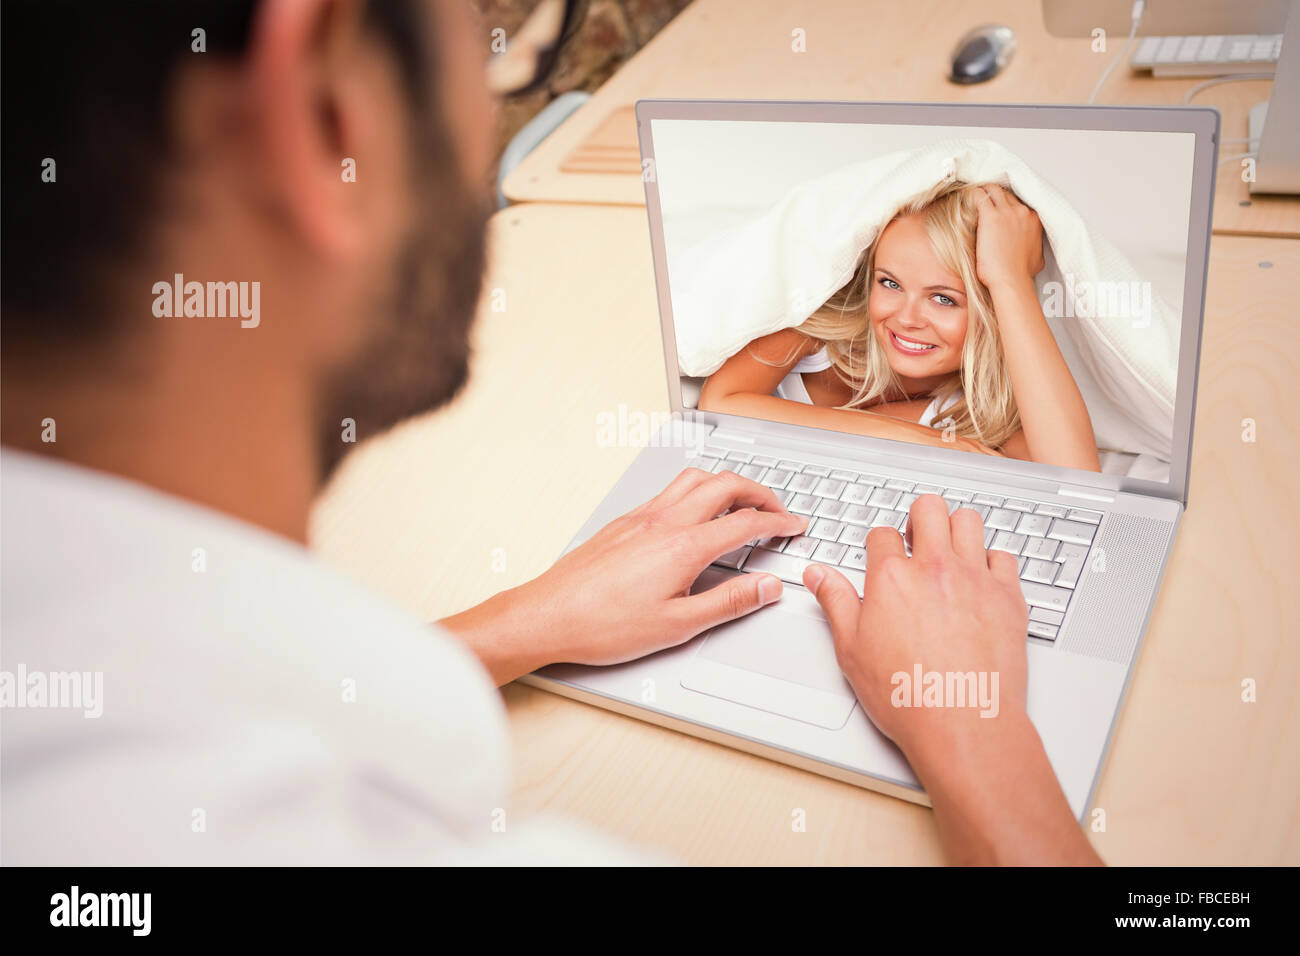 Composite image of smiling woman under a duvet Stock Photo